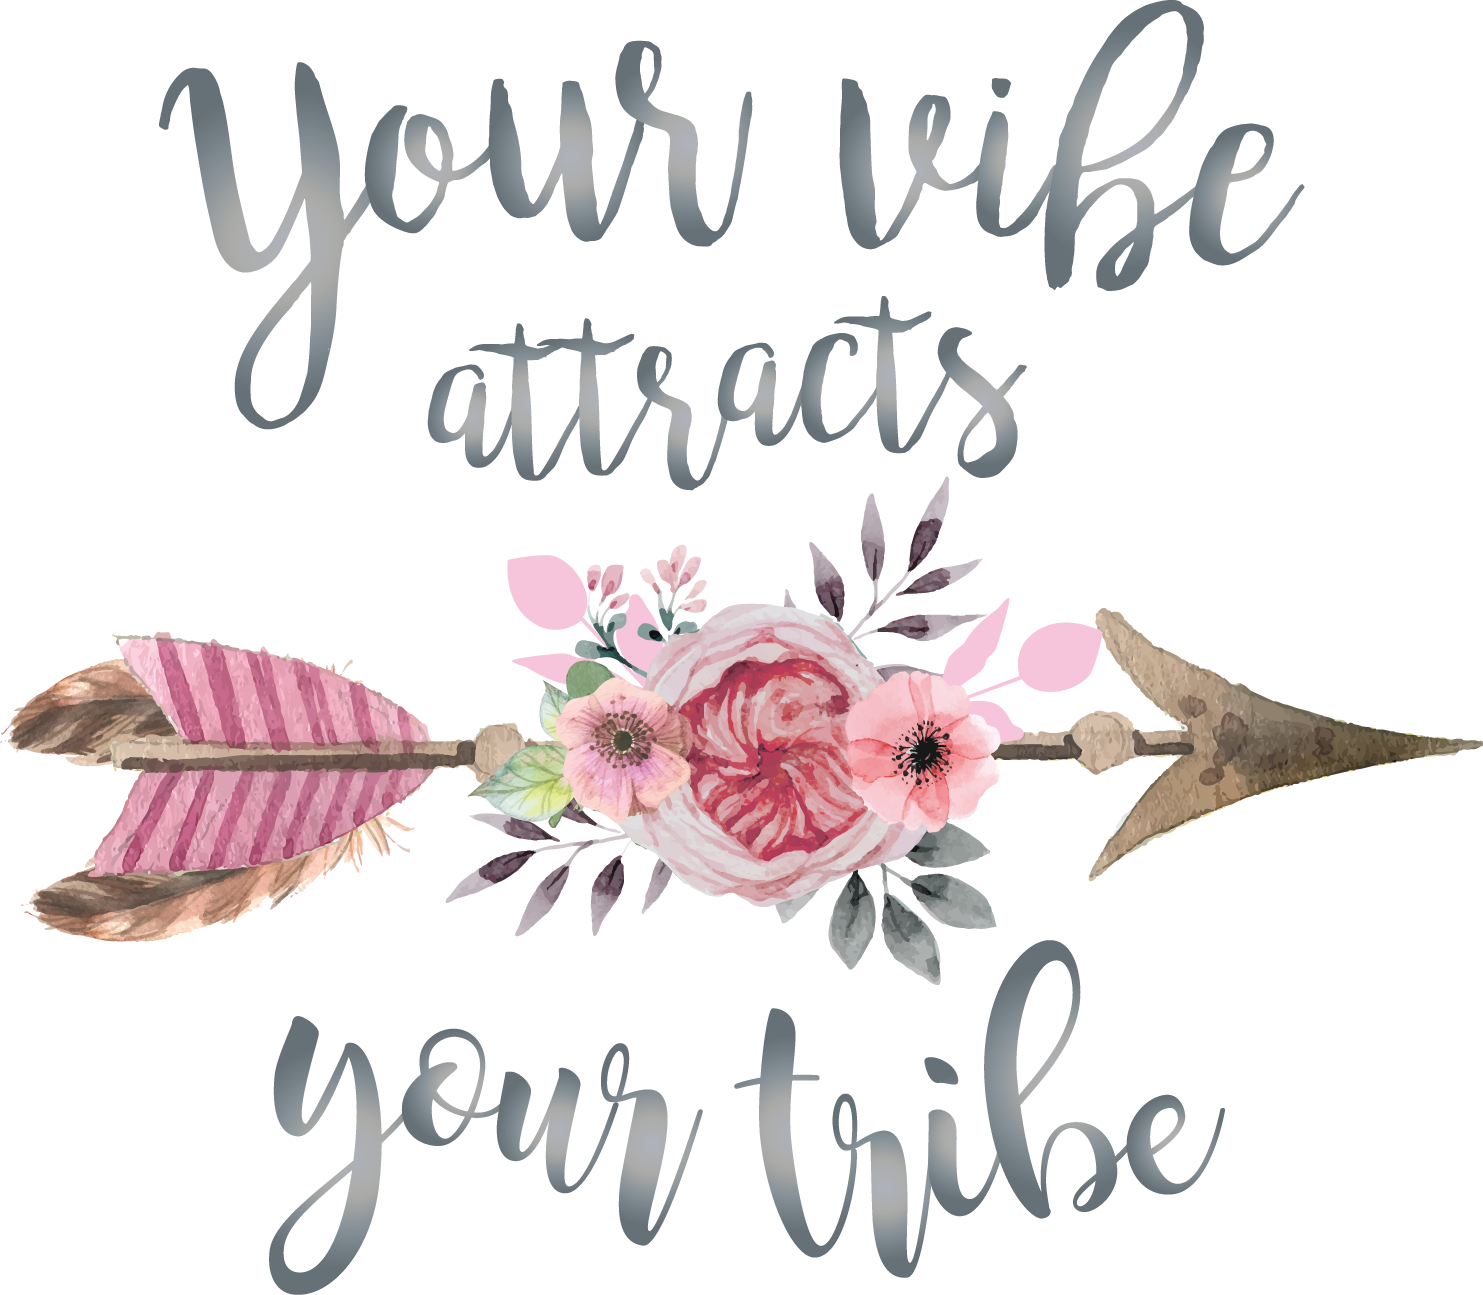 Your vibe attracts your tribe (Arrow)- Printed Tee